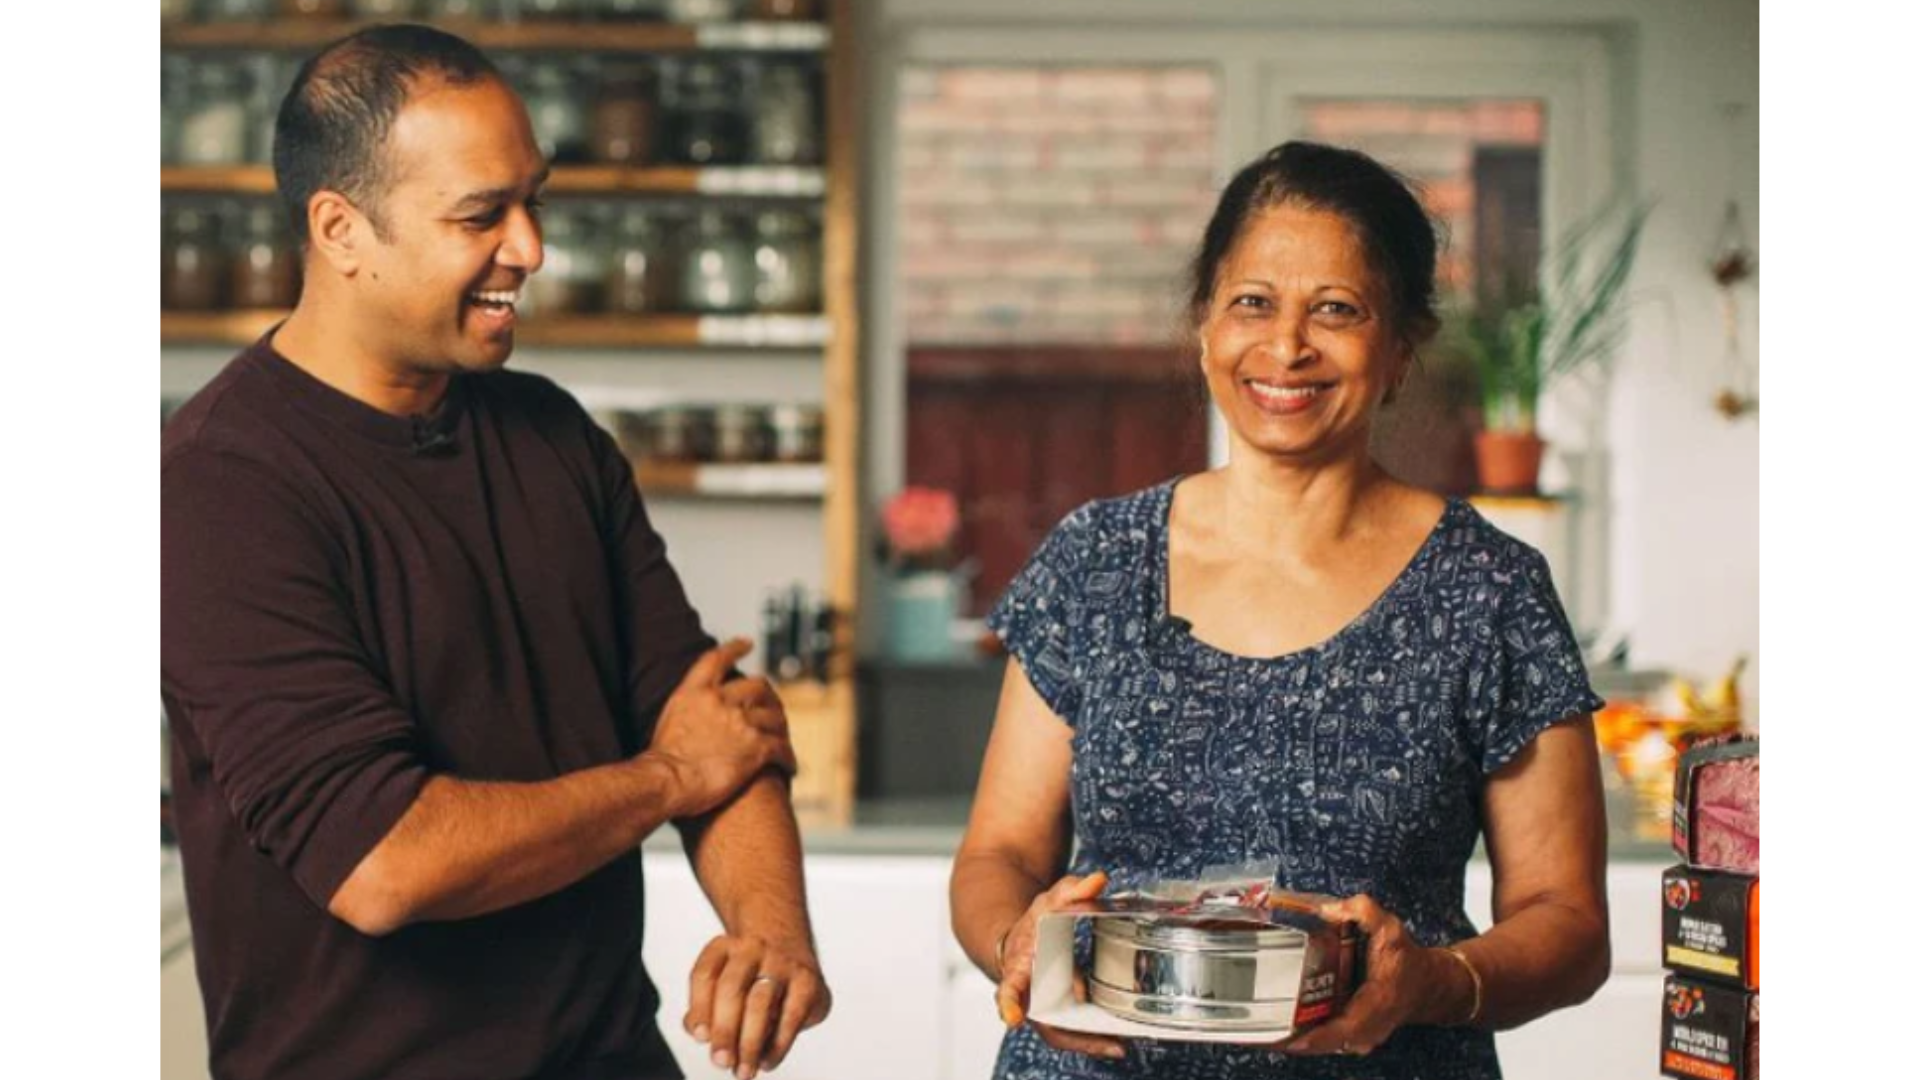 Owners of Spice Kitchen